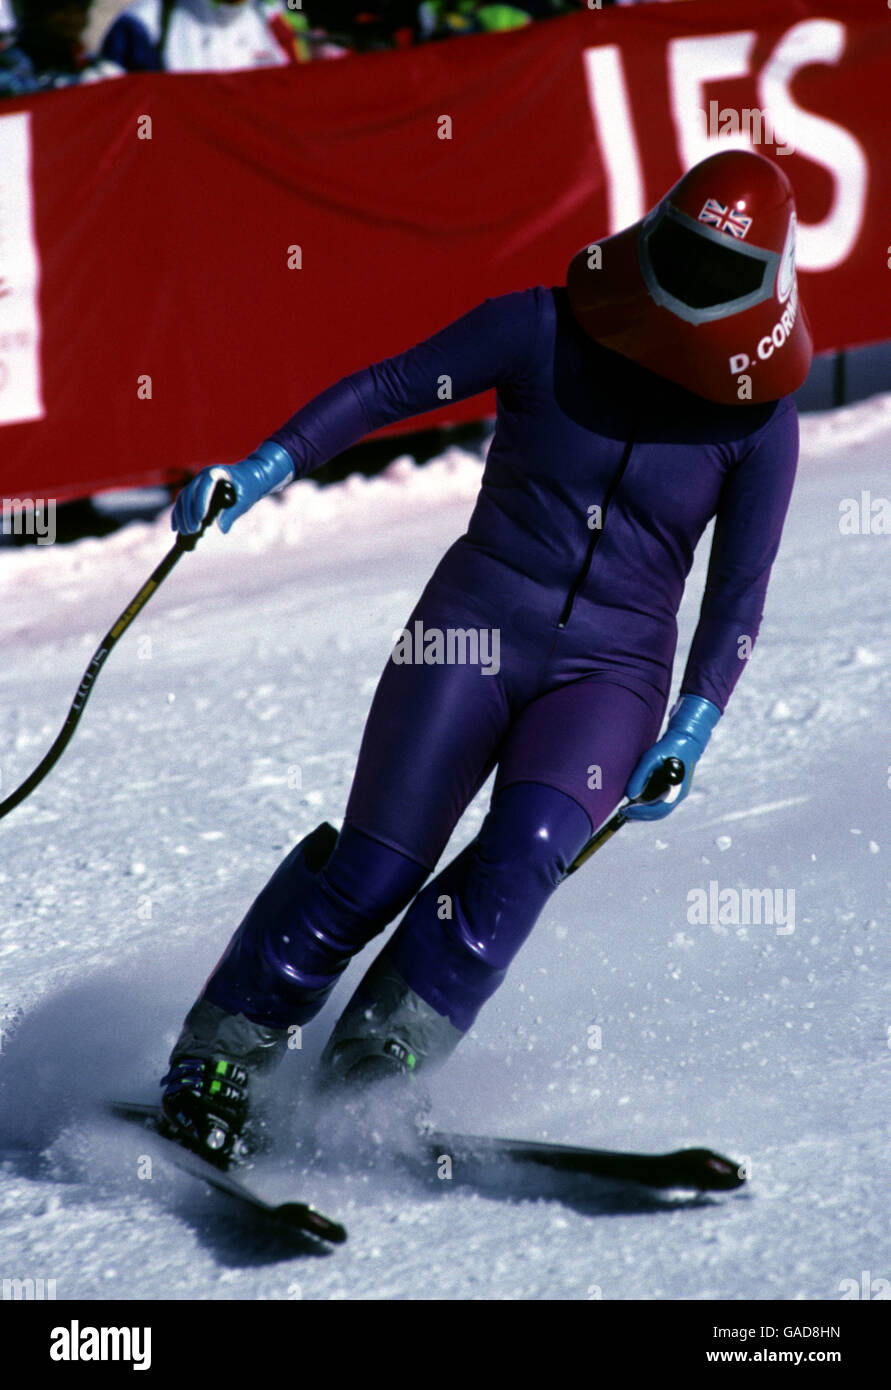 Winter Olympic Games 1992 - Albertville. Great Britain's D. Corminboeuf competes in the Speed skiing Stock Photo